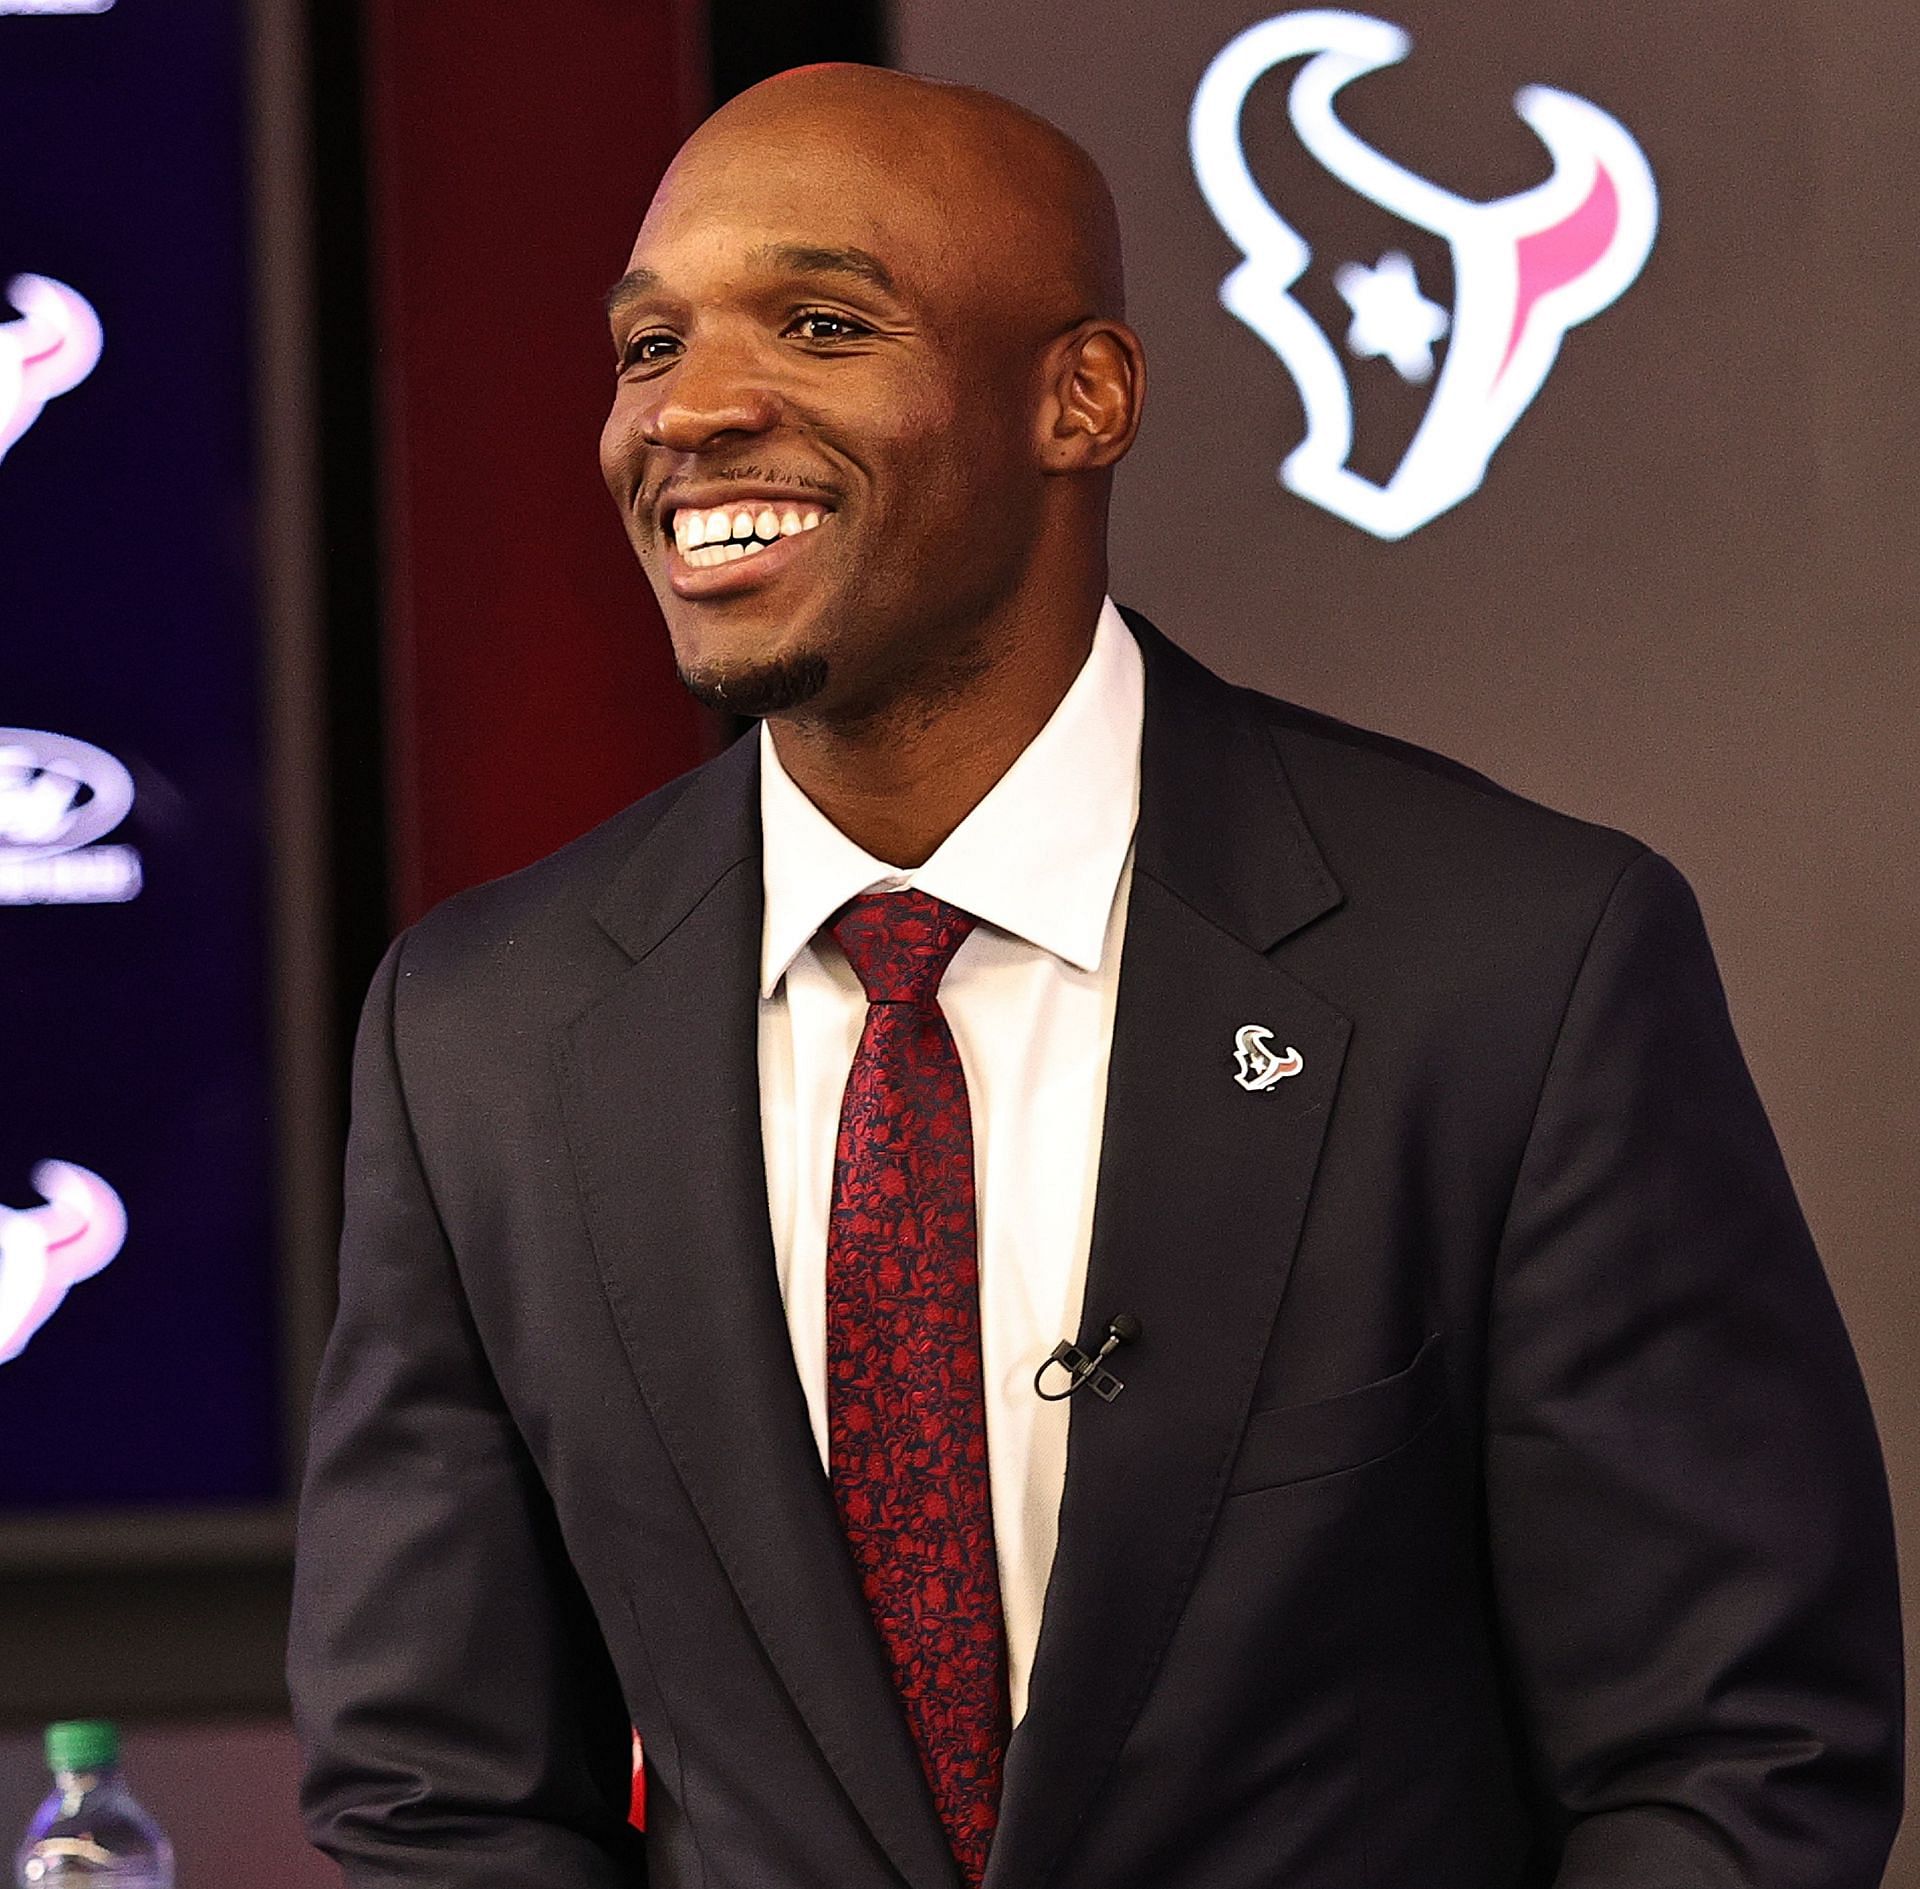 DeMeo Ryans faces a tall task in his first year as Texans coach.